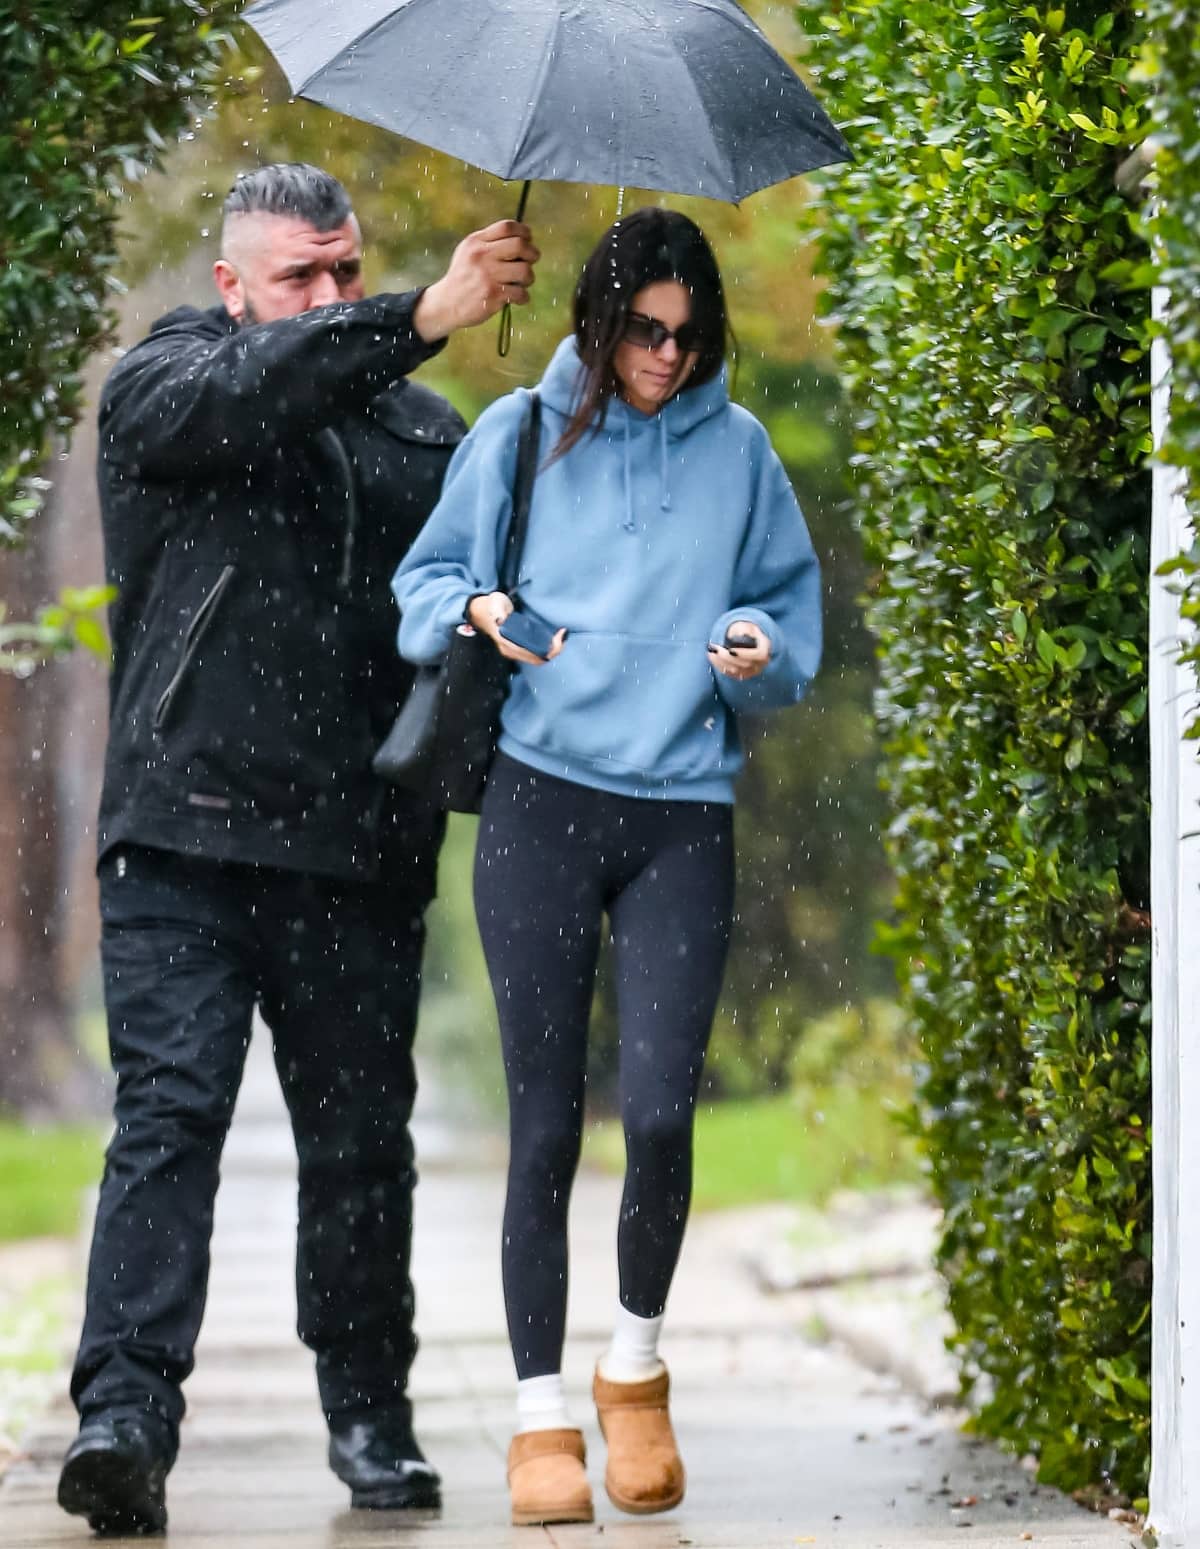 Kendall Jenner’s bodyguard getting soaked while he held the umbrella over her head to protect her from the rain